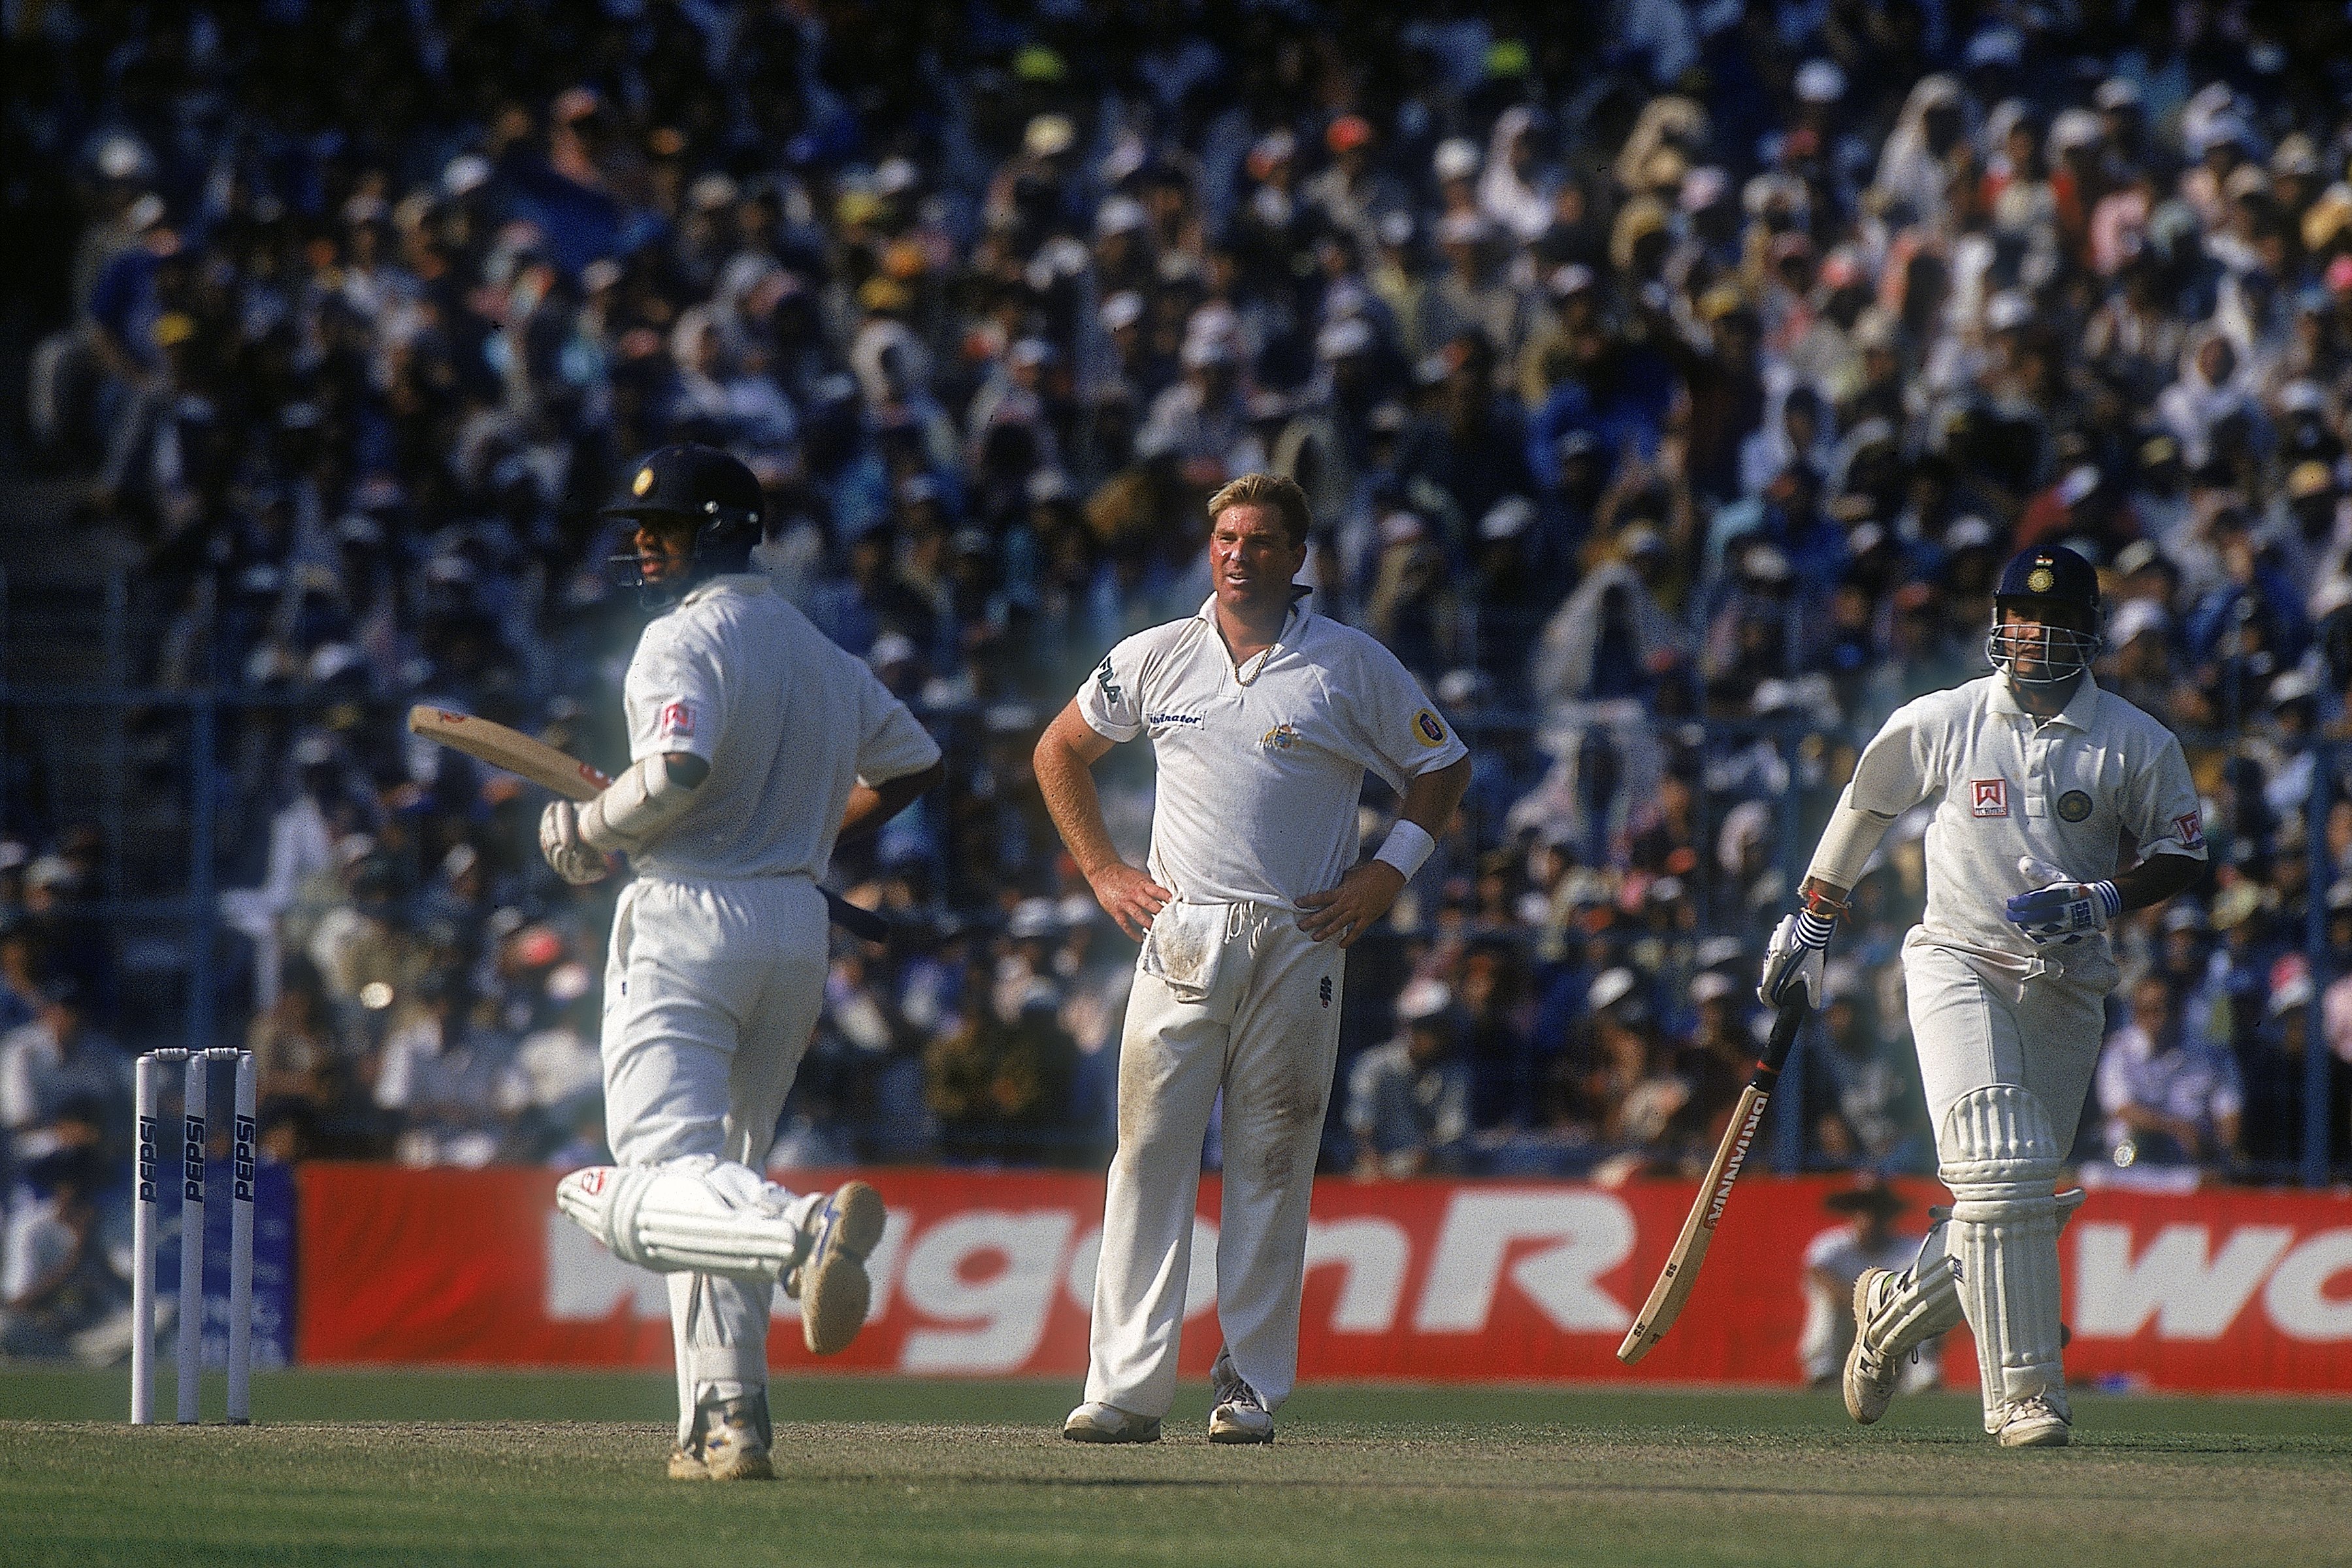 Five of the most thrilling India vs Australia Tests